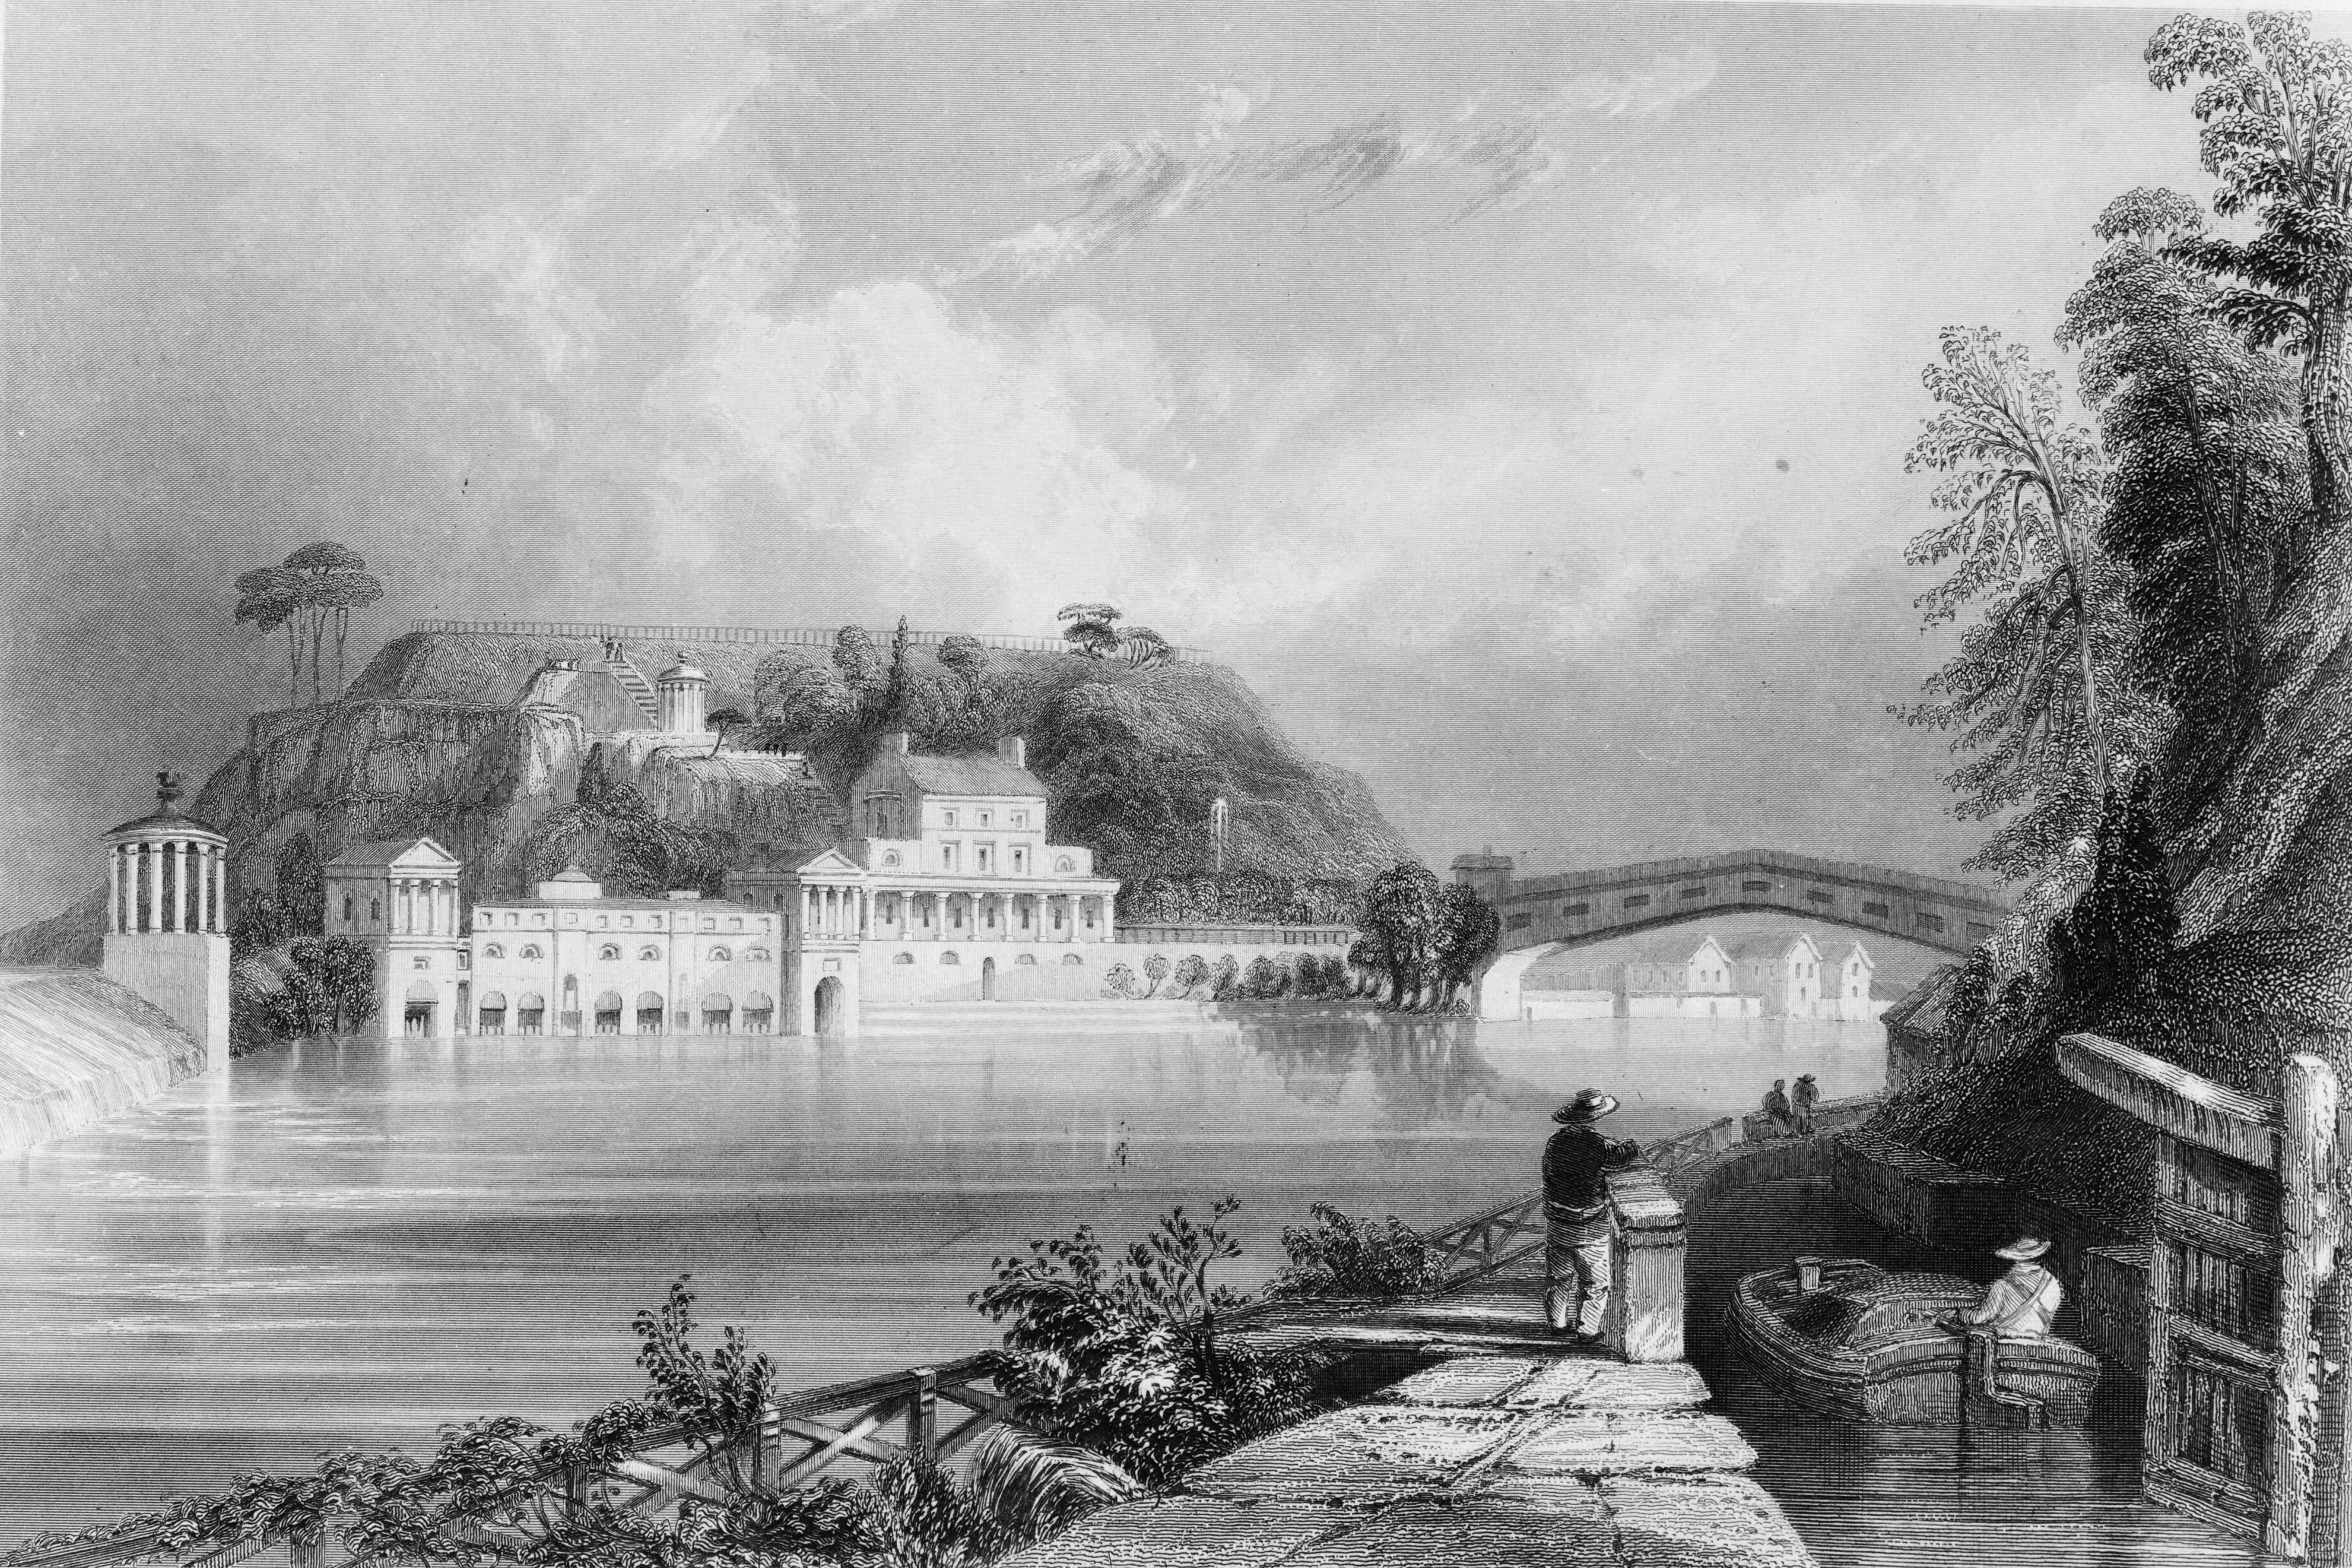 1835 Engraving of the Fairmount Water Works